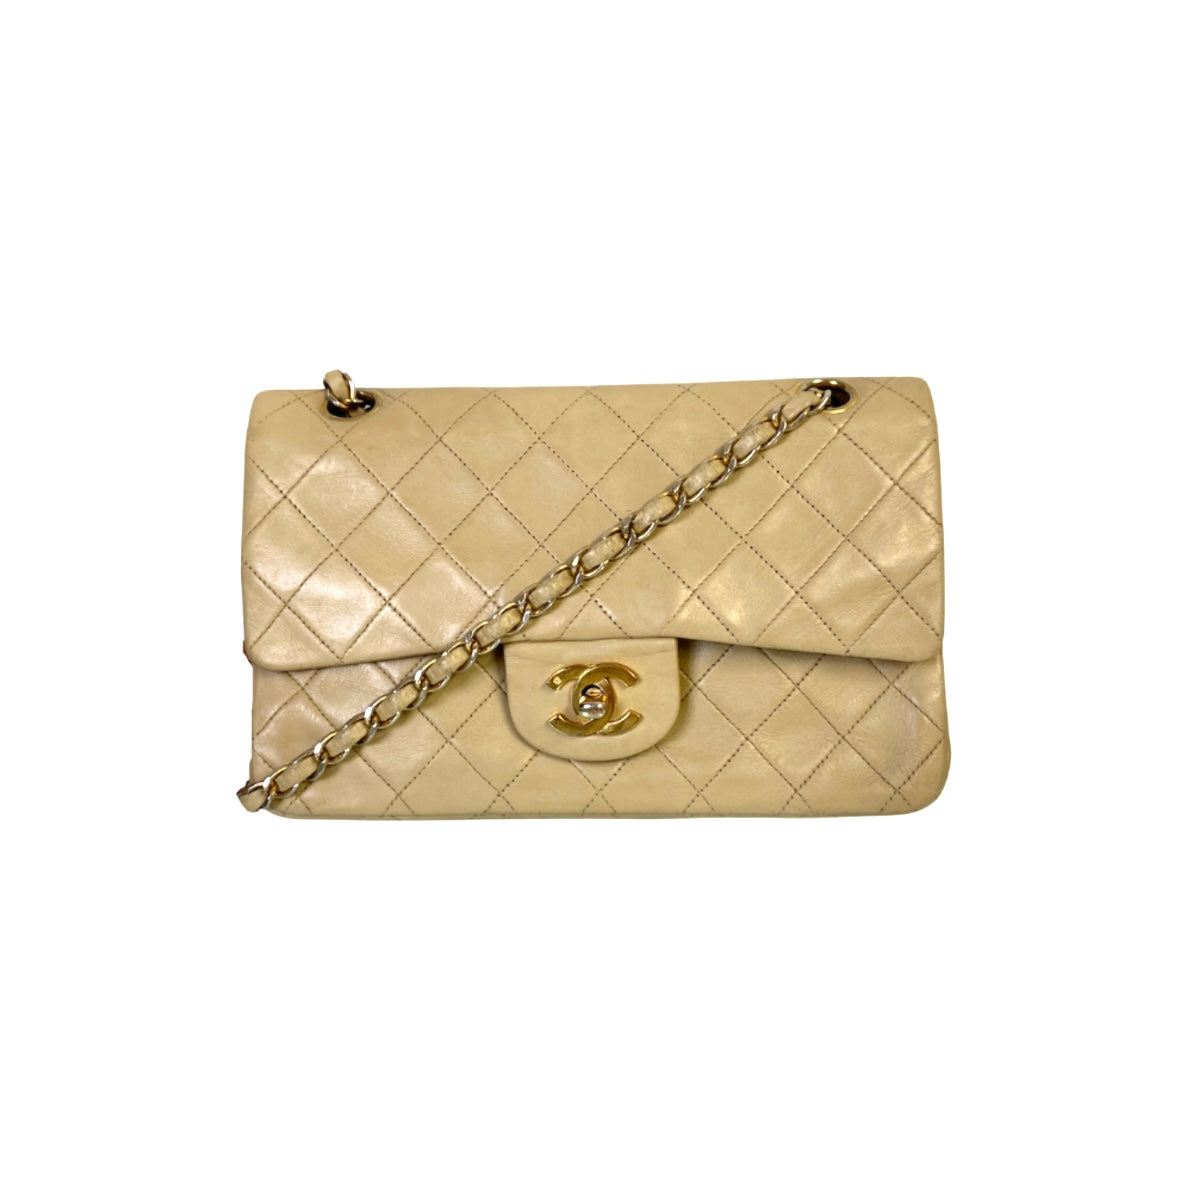 Chanel Classic Flap Bag Small Lambskin Leather